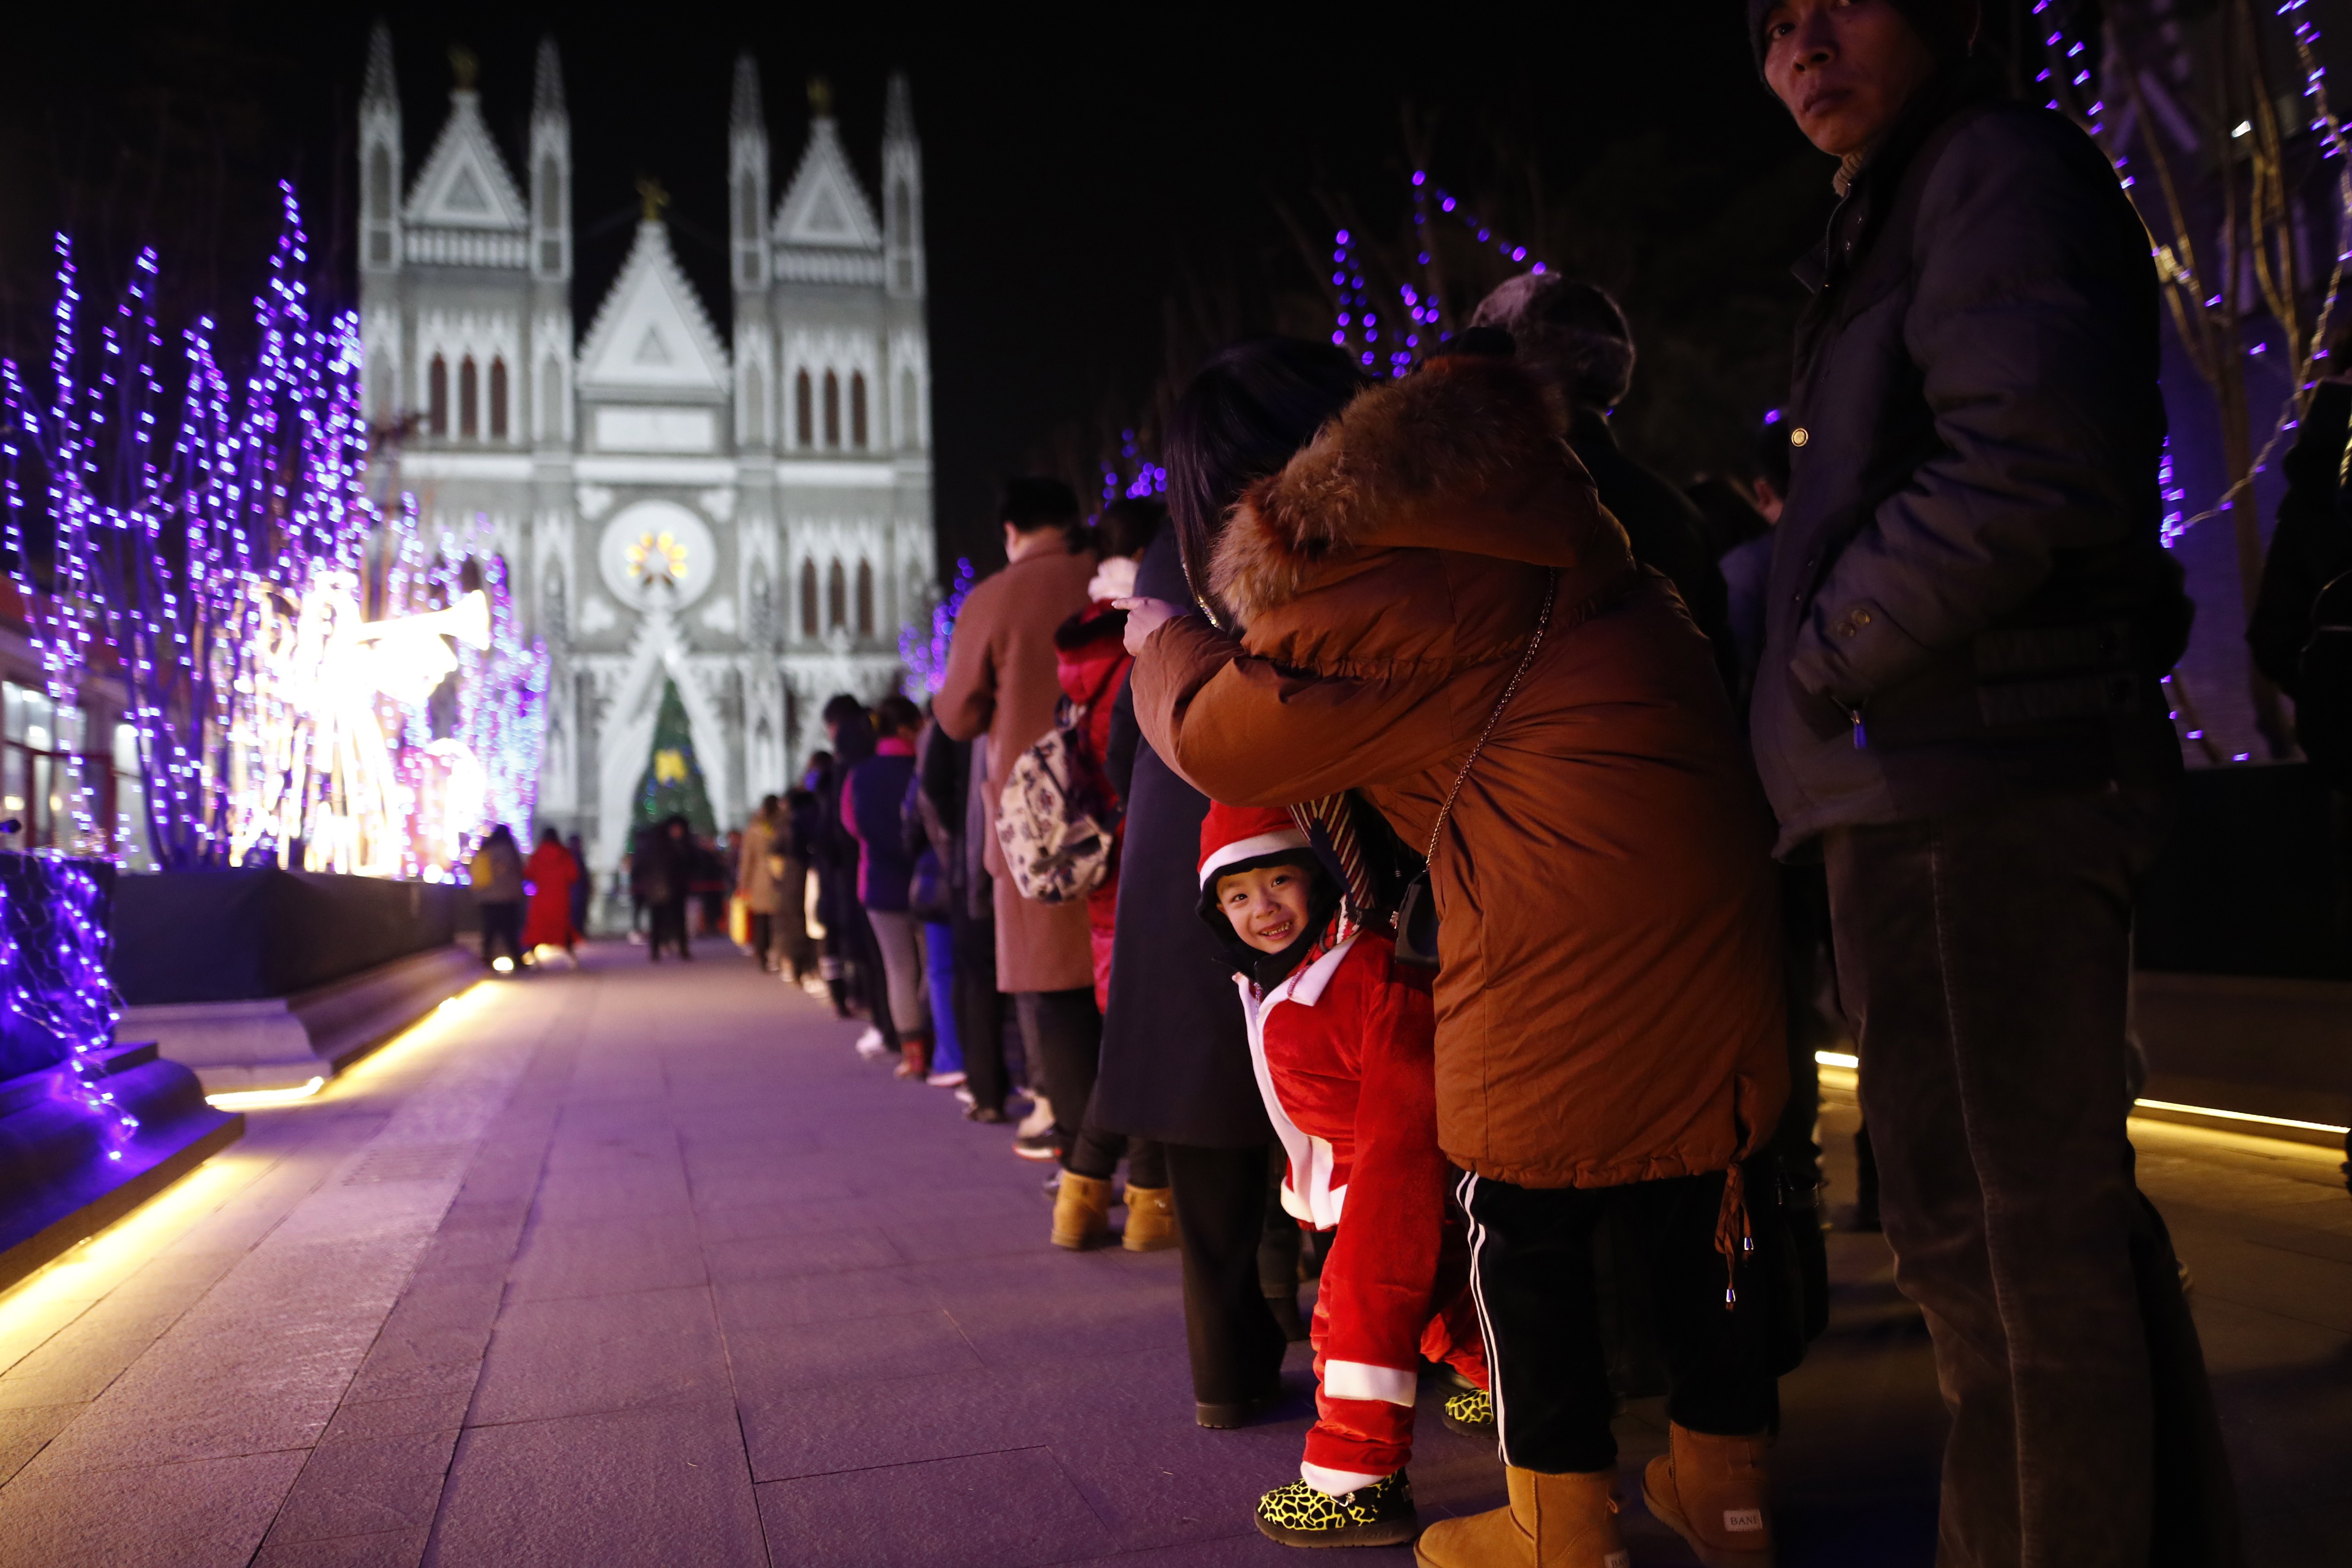 Catholics wait to attend Christmas Eve mass at the Xishiku Catholic Church in Beijing last month. Will 2019 be the year Pope Francis finally visits China? Photo: EPA-EFE